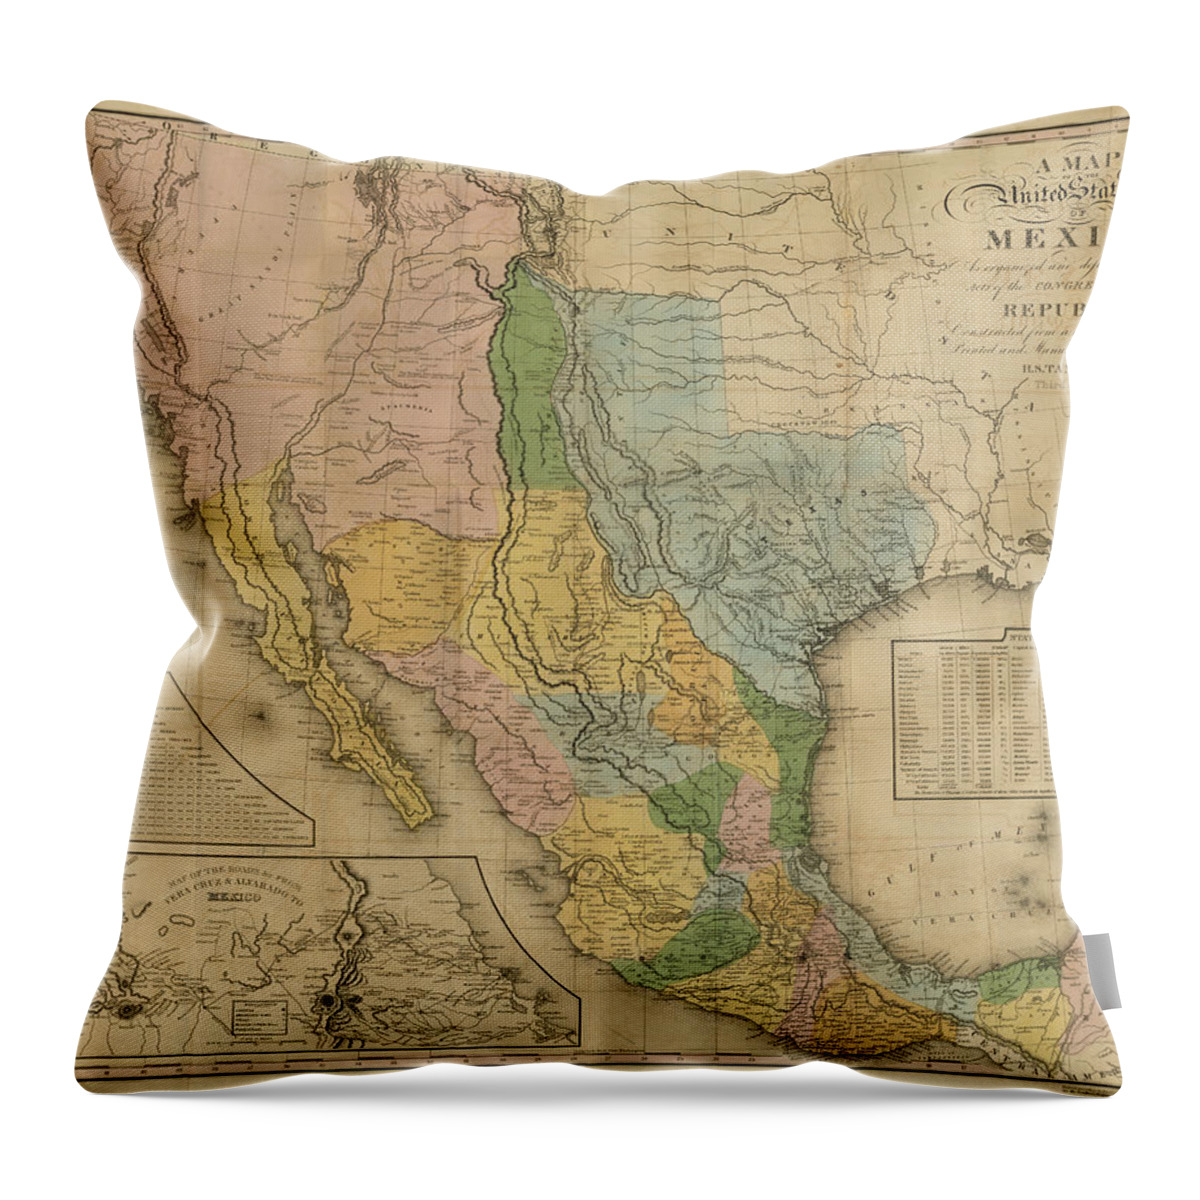 Texas Throw Pillow featuring the digital art Map of the United States of Mexico, Tanner 1846 by Texas Map Store